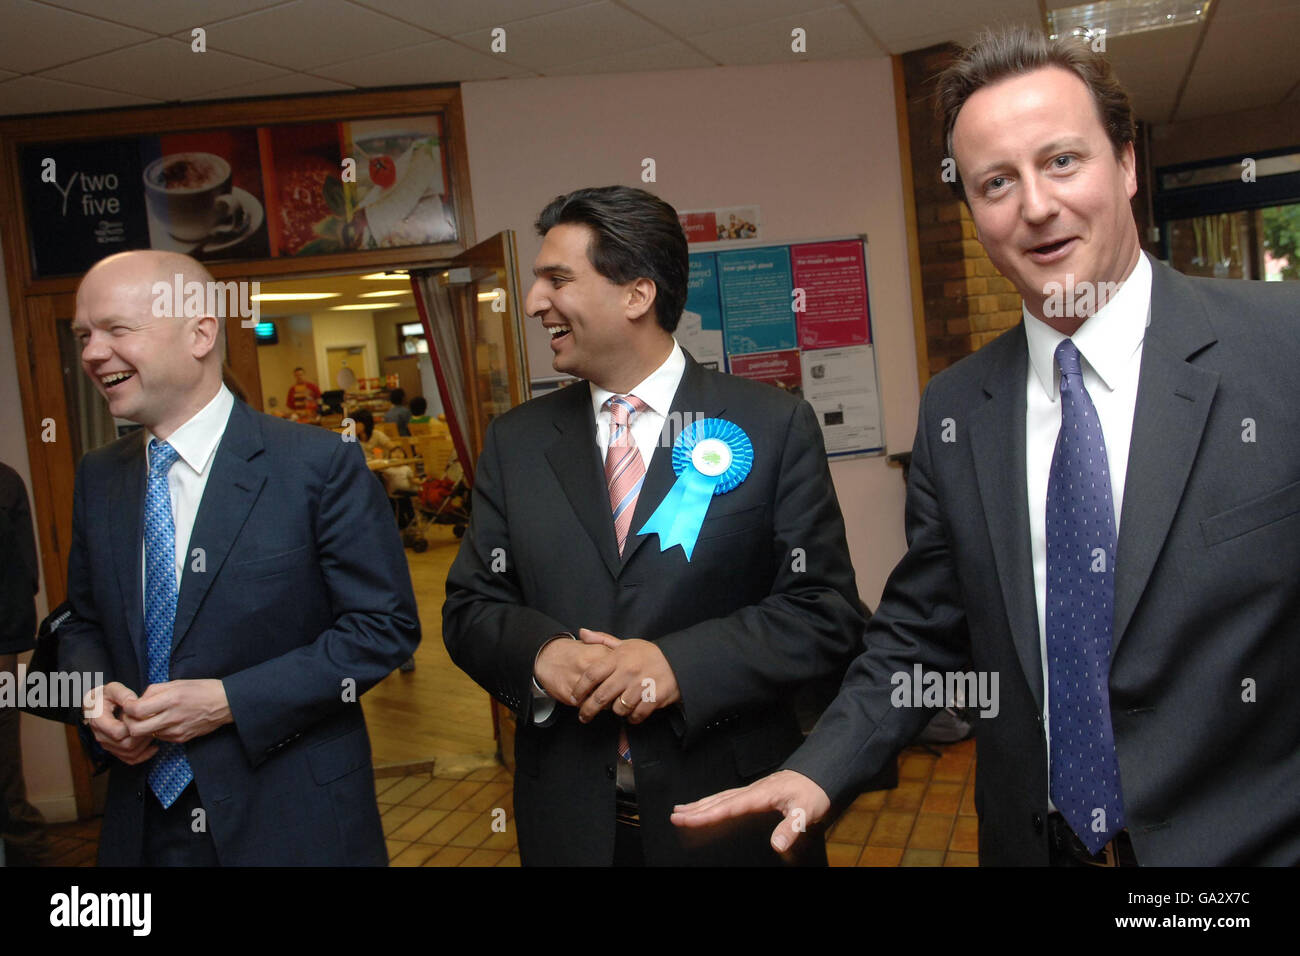 Conservative Party leader David Cameron (right) campaigns for the council by-election in Ealing, west London today with Tory candidate Tony Lit (centre) and shadow Foreign Secretary William Hague (left). Stock Photo